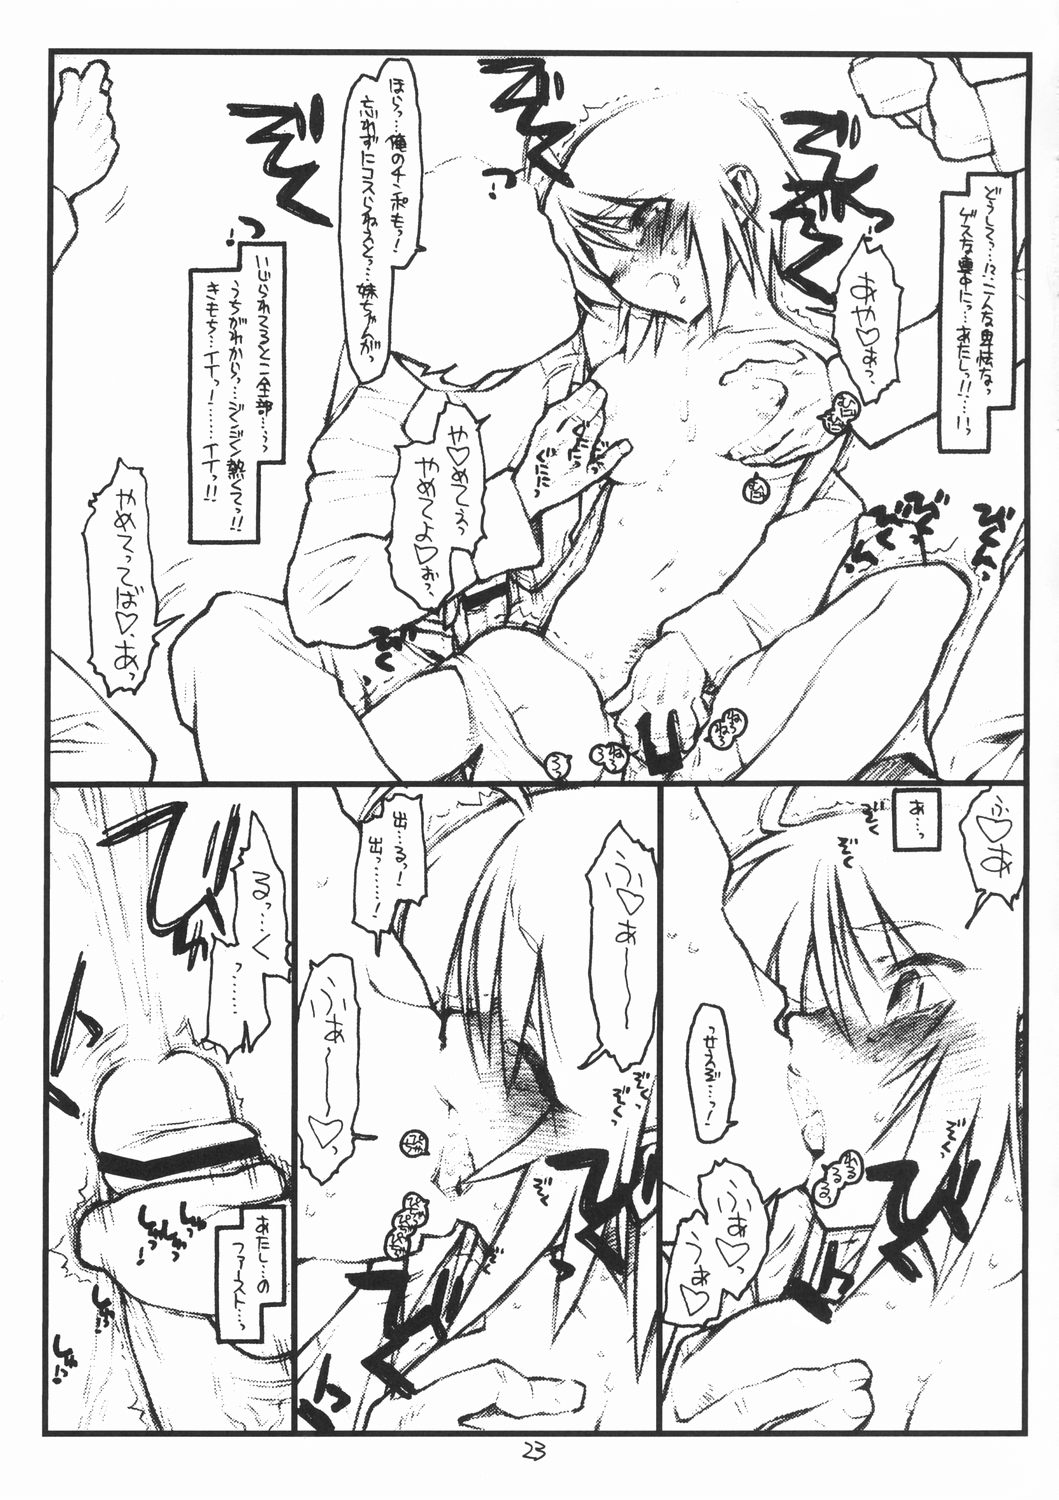 (SC28) [bolze. (rit.)] Miscoordination. (Mobile Suit Gundam SEED DESTINY) page 22 full